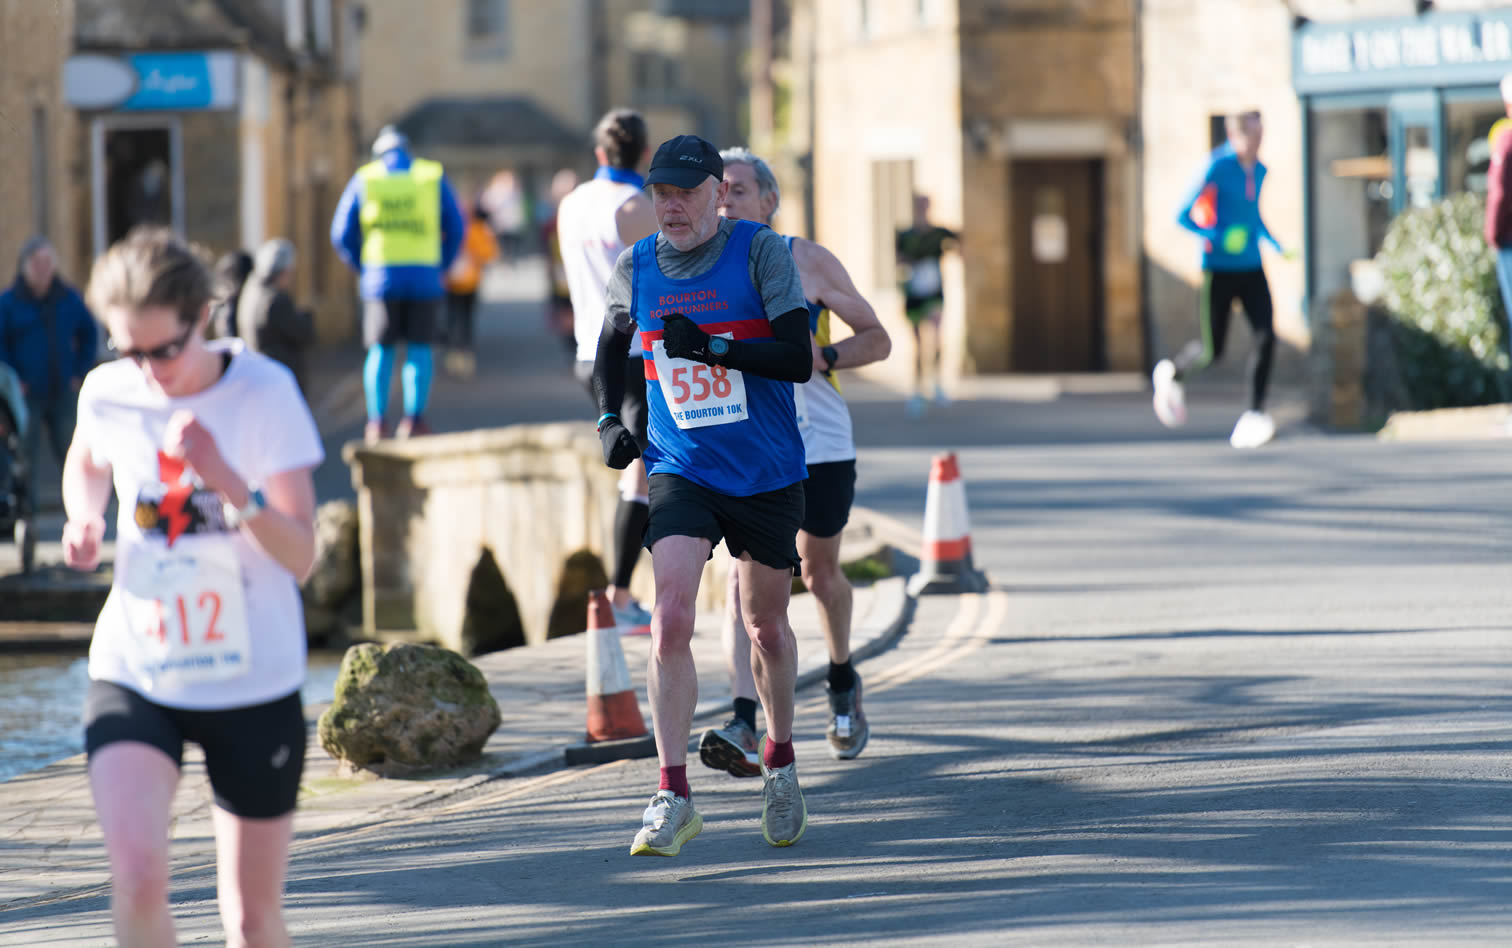 Neil Russell at Bourton 10k - 27th February 2022